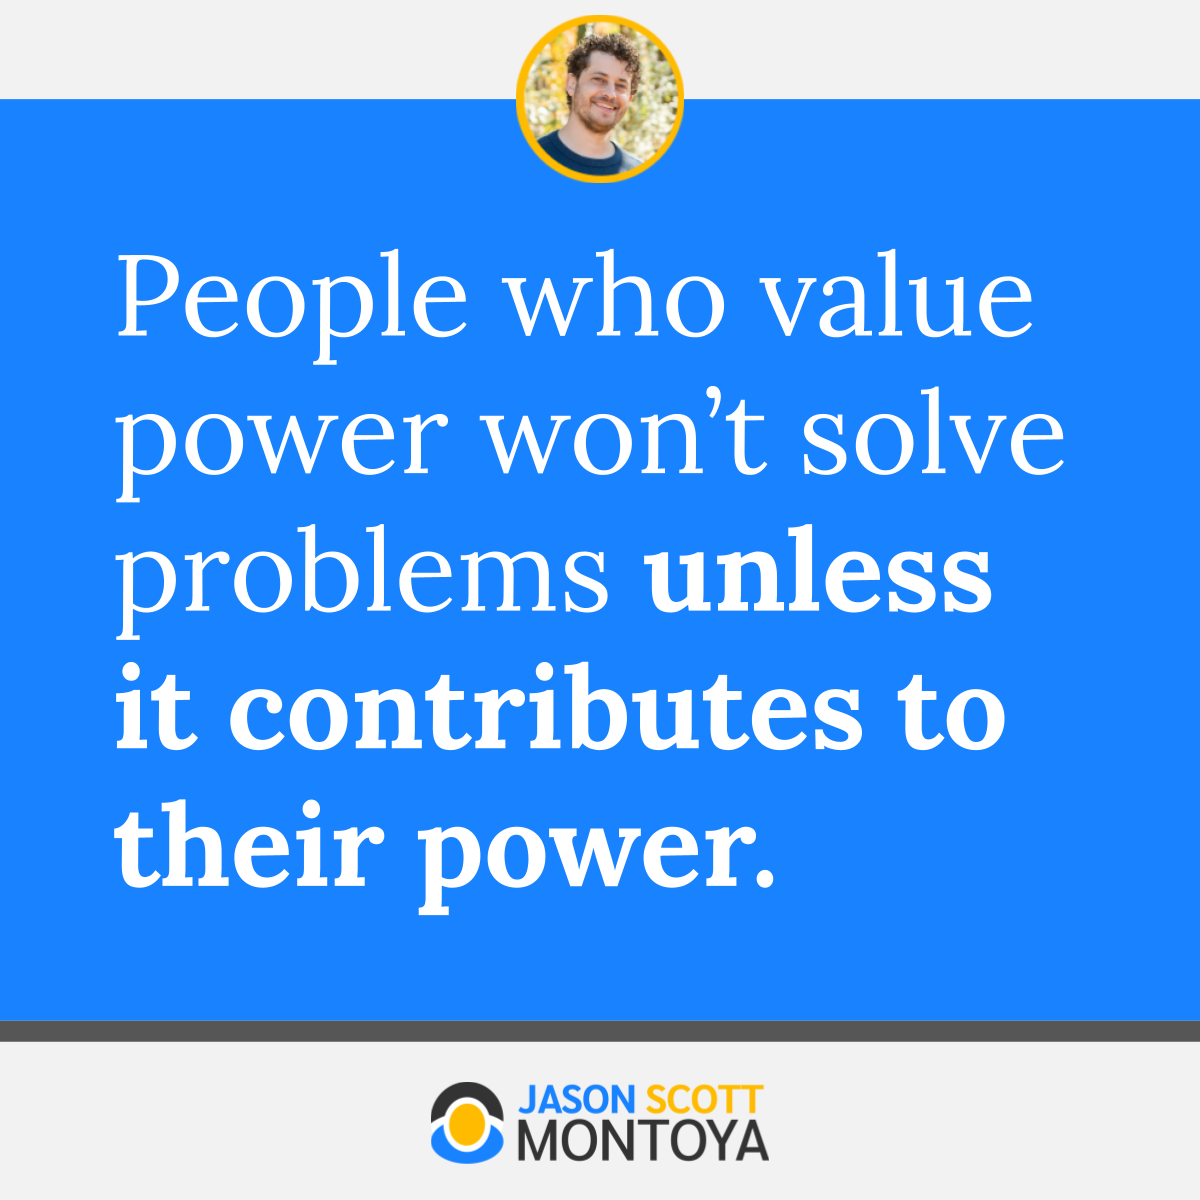 People who value power won’t solve problems unless it contributes to their power.